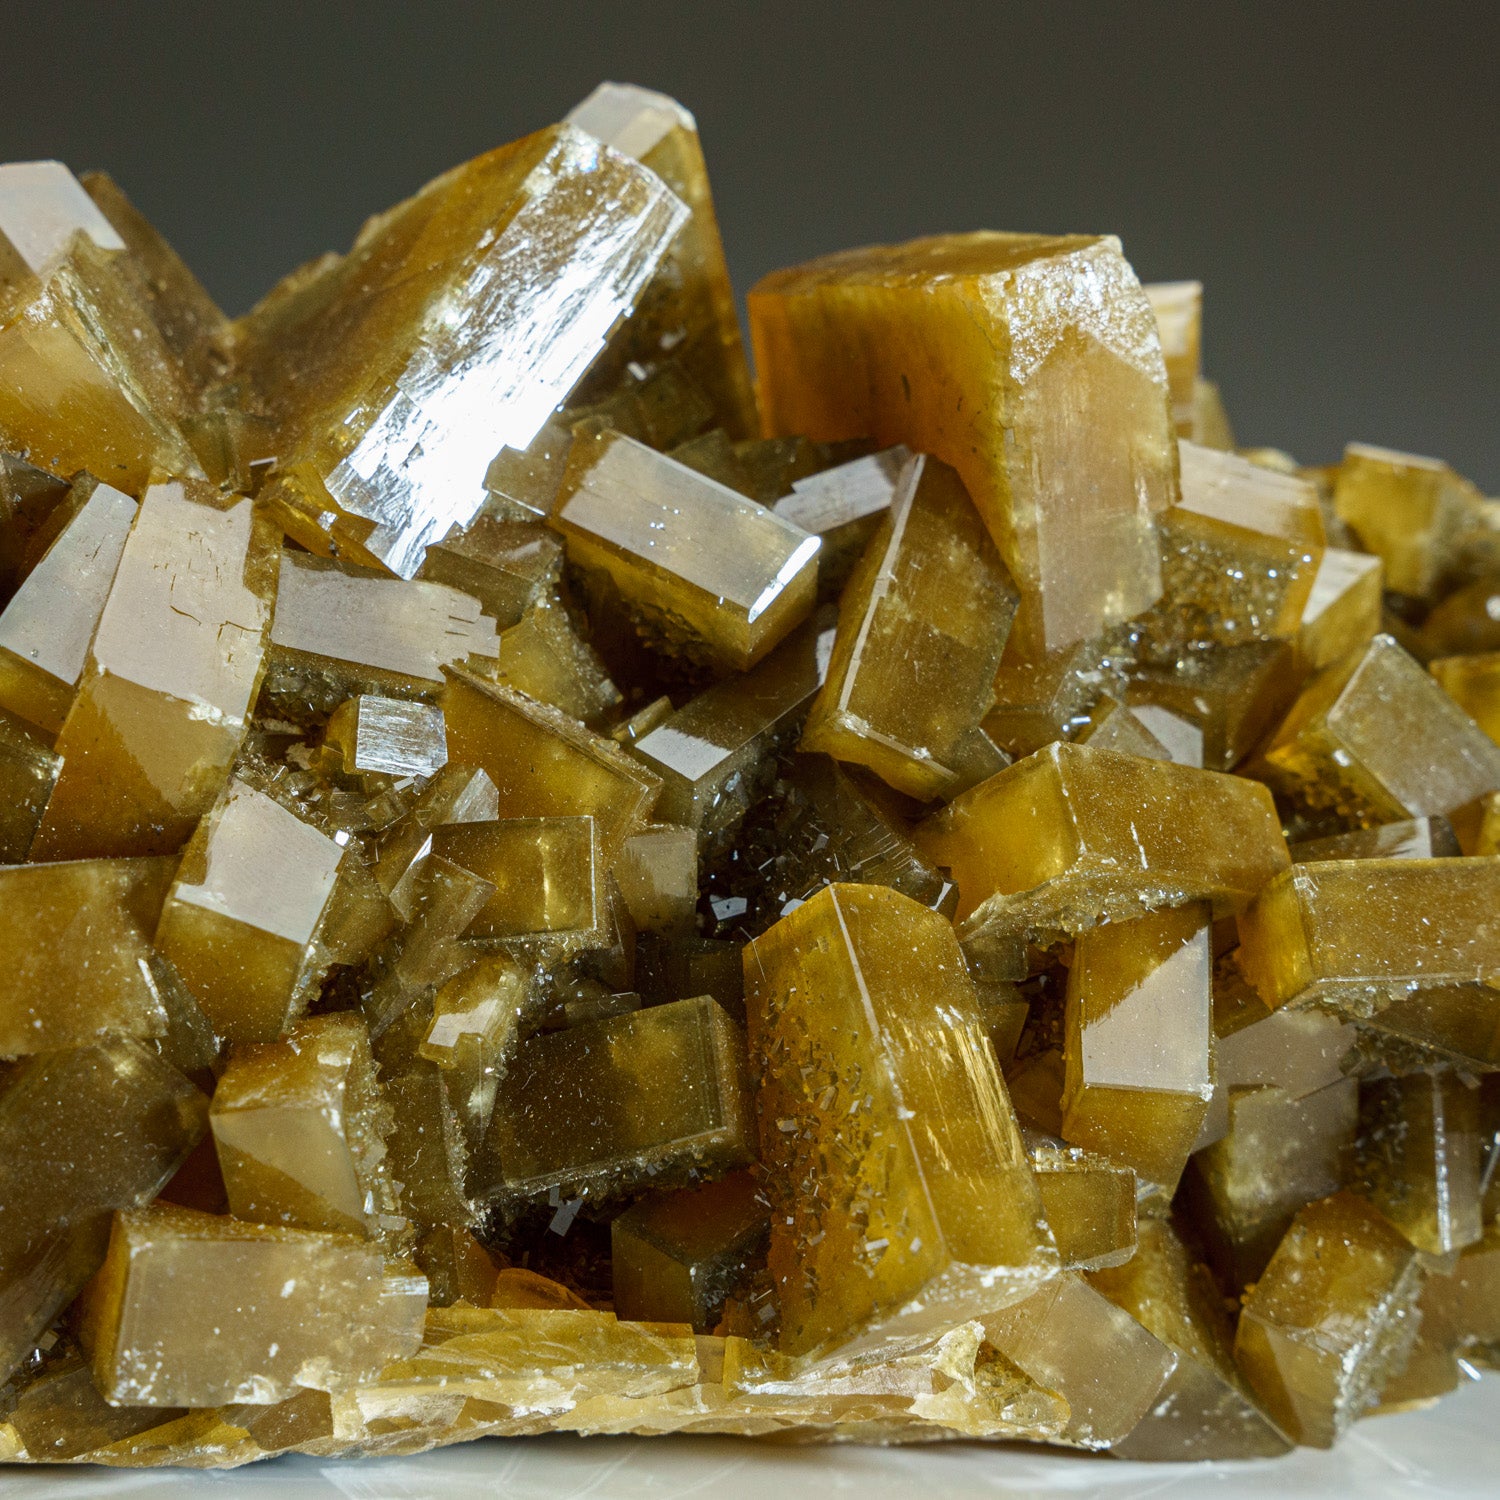 Golden Barite with Marcasite Crystals from Nandan County, Hechi, Guangxi, China